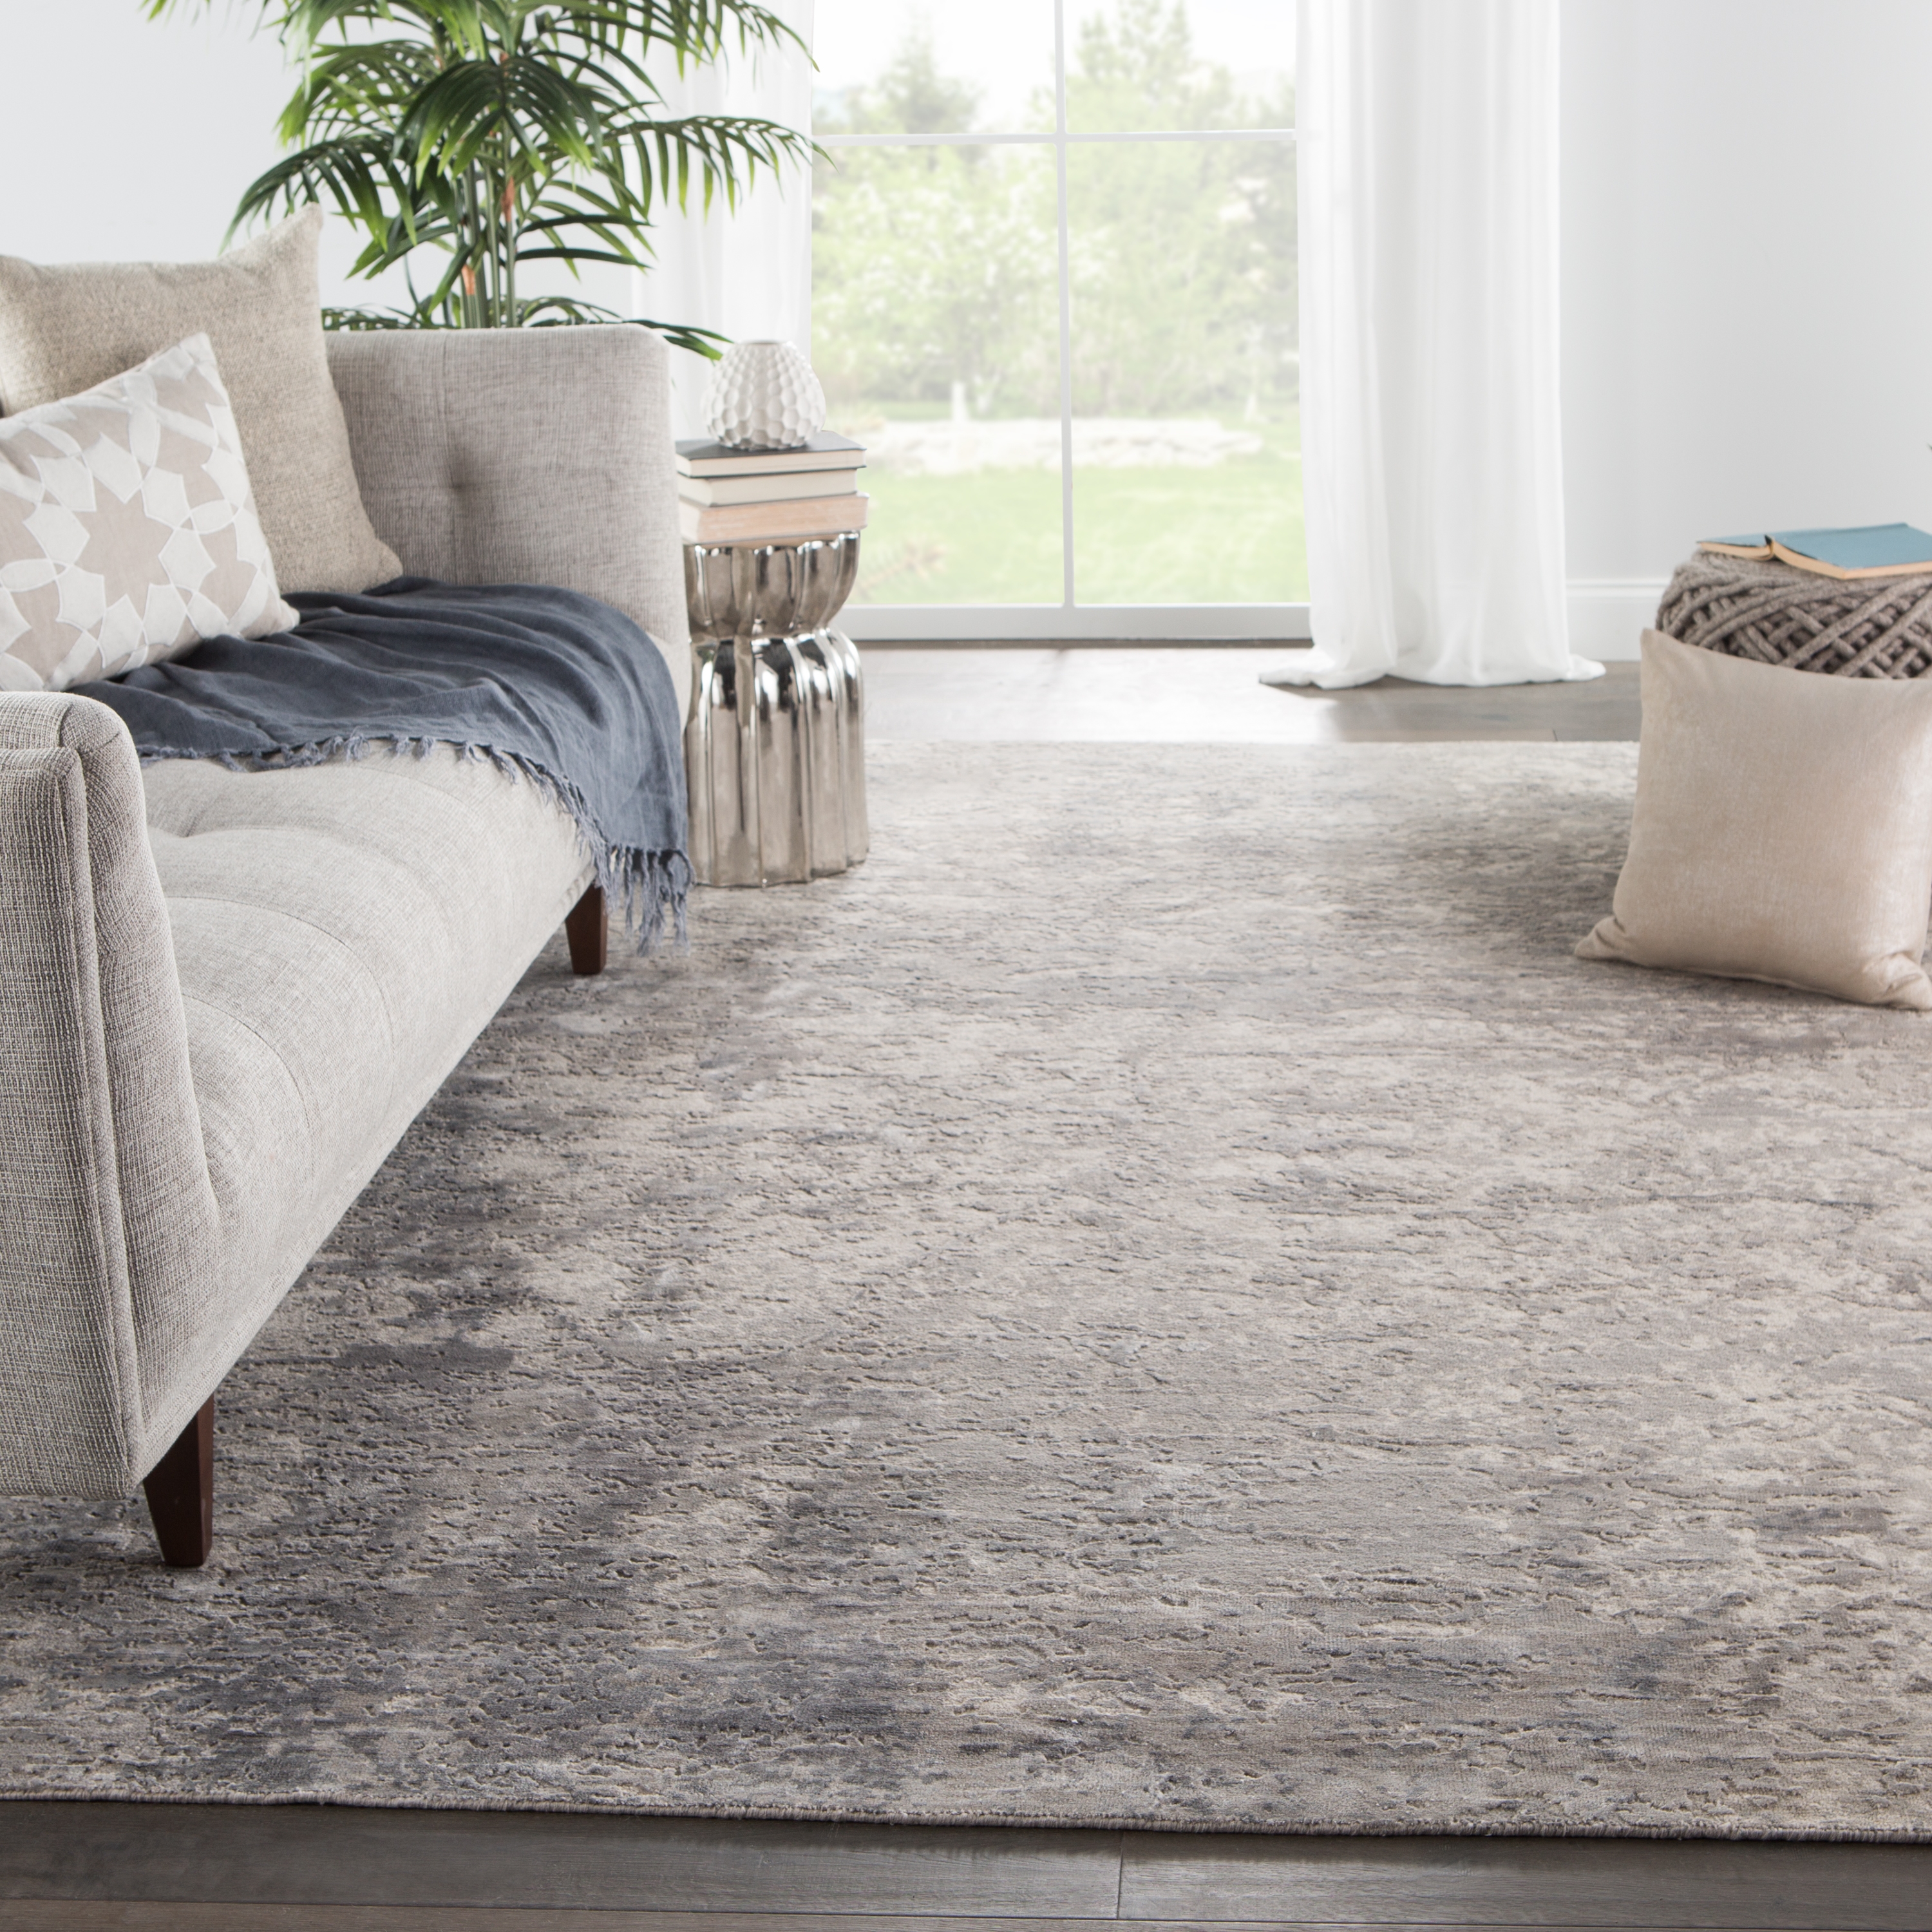 Kavi by Tagada Hand-Knotted Abstract Gray/ Beige Area Rug (10'X14') - Image 4